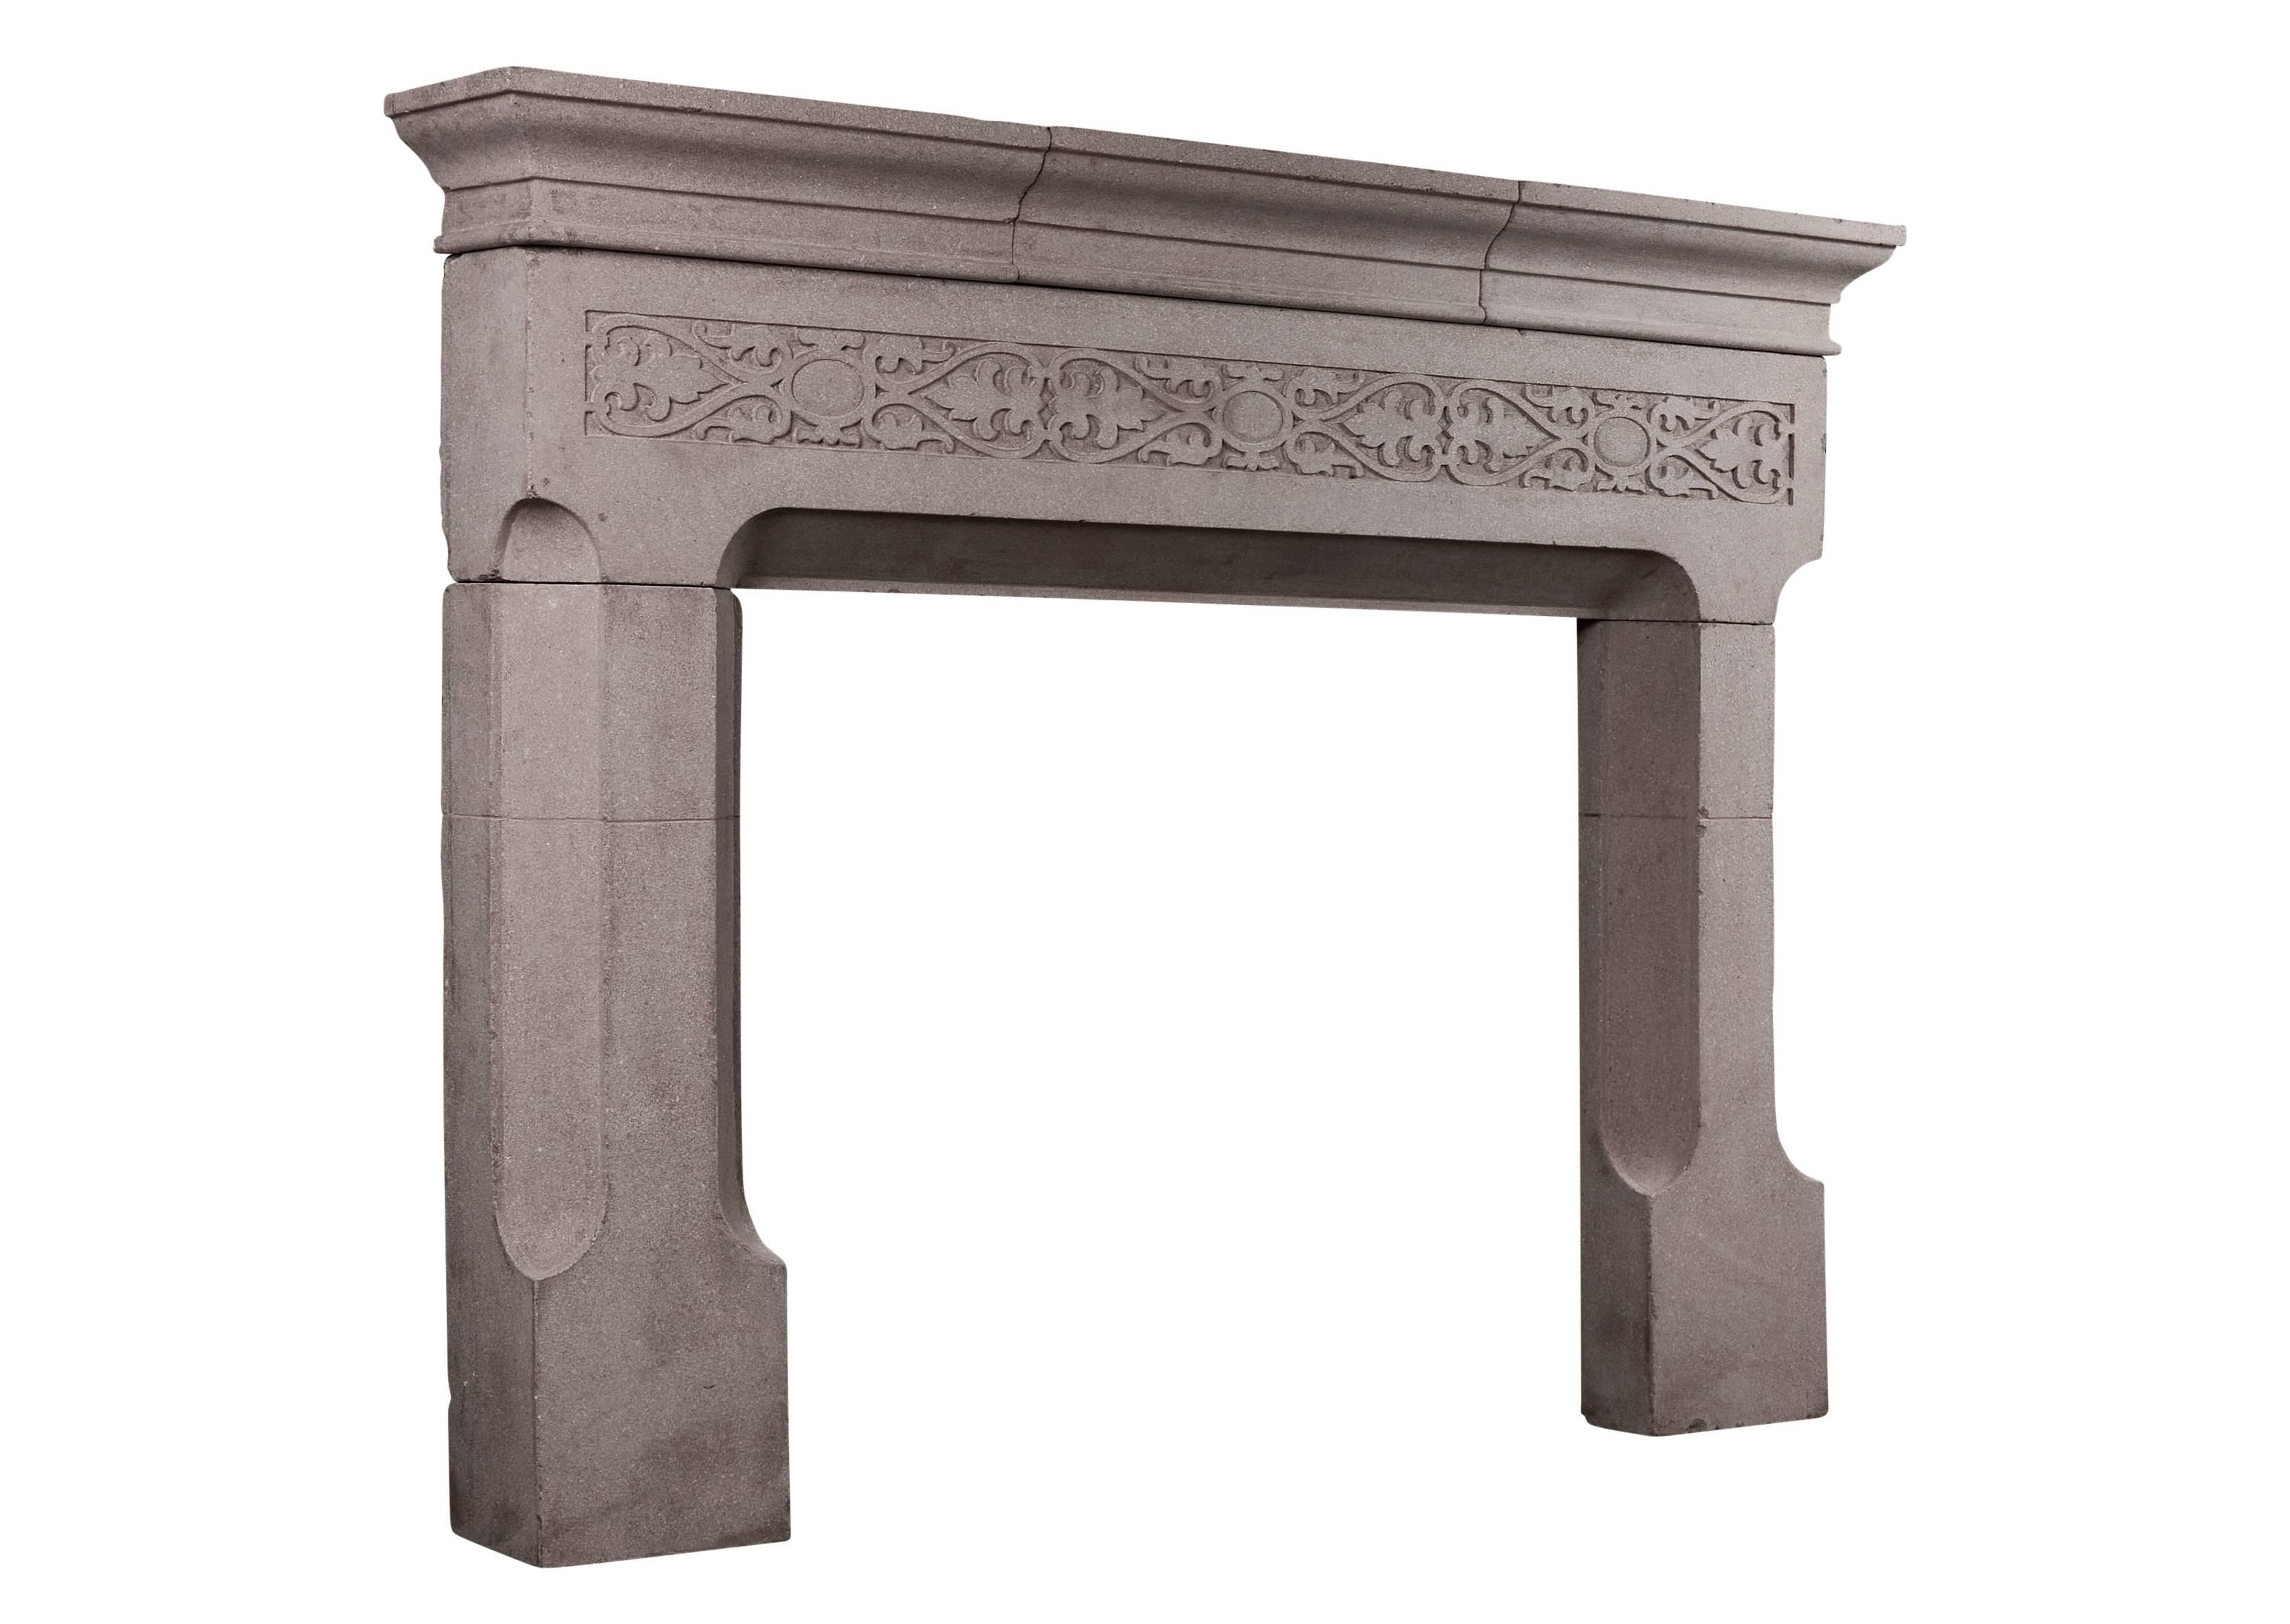 A finely cast stone fireplace in the Gothic style. The shaped legs surmounted by decorative frieze embellished with foliage and plain paterae throughout. Moulded shelf above. English, circa 1900.

Measurements: 
Shelf width: 1475 mm / 58 1/8